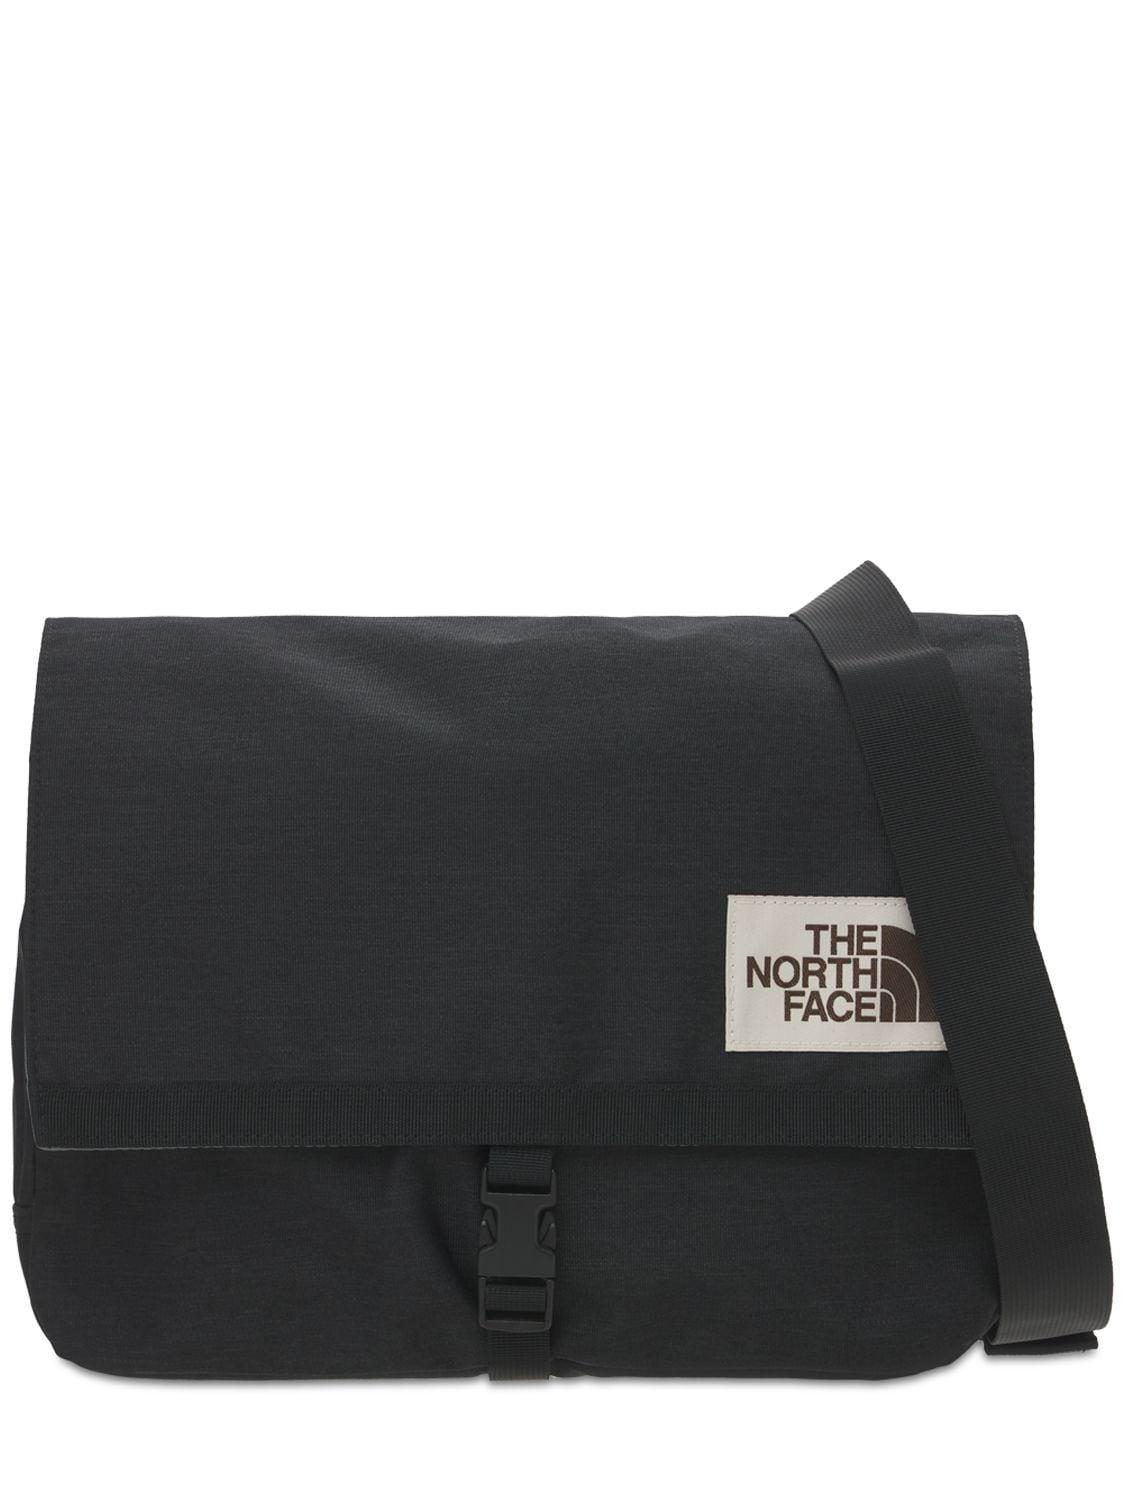 Ministry Belly Tectonic The North Face Berkeley Satchel in Black for Men | Lyst